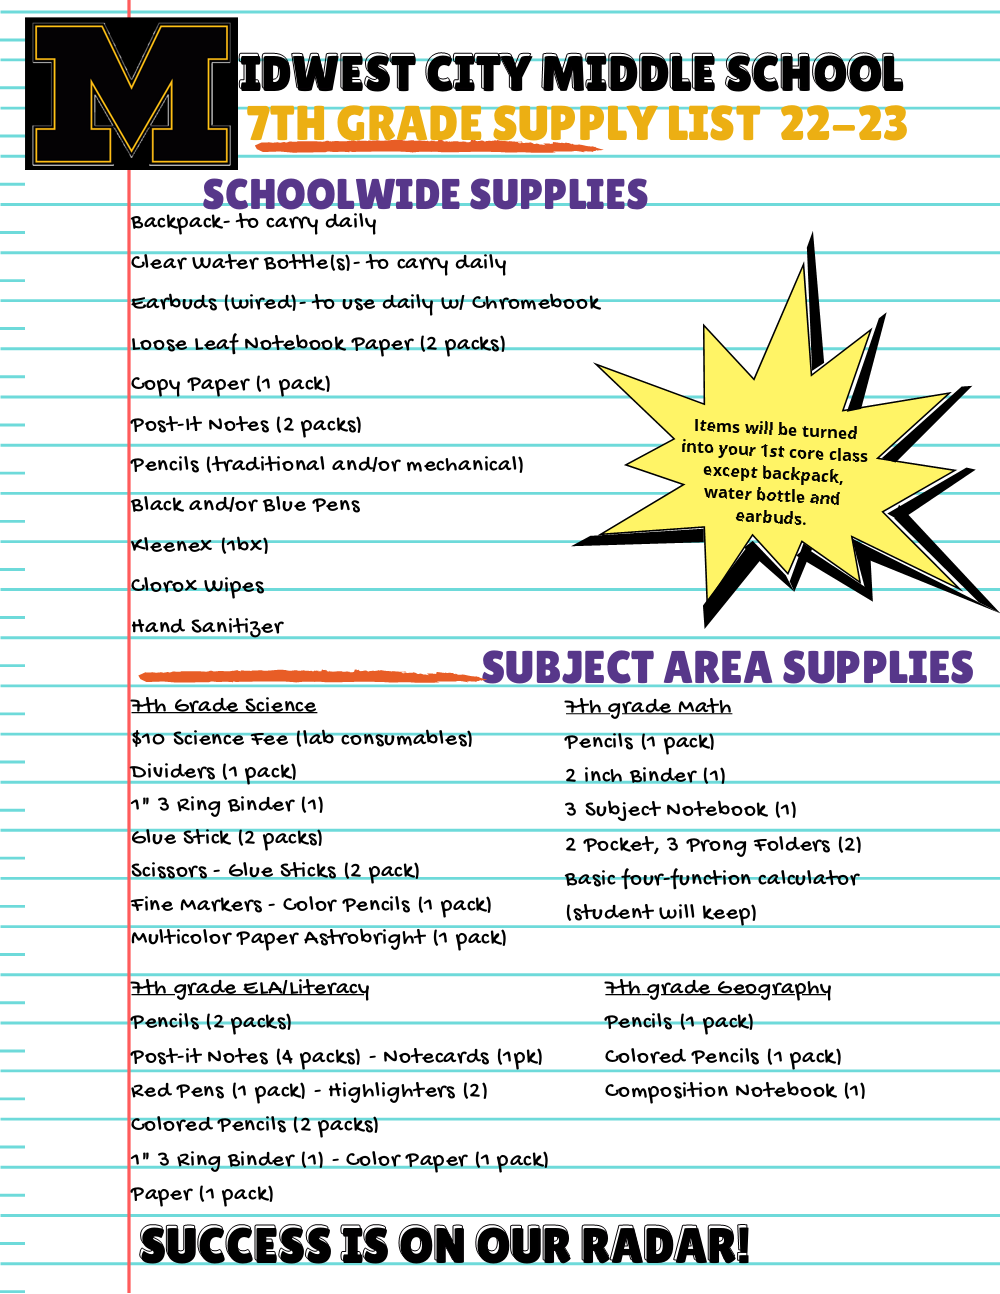 20222023 School Supply List Midwest City Middle School